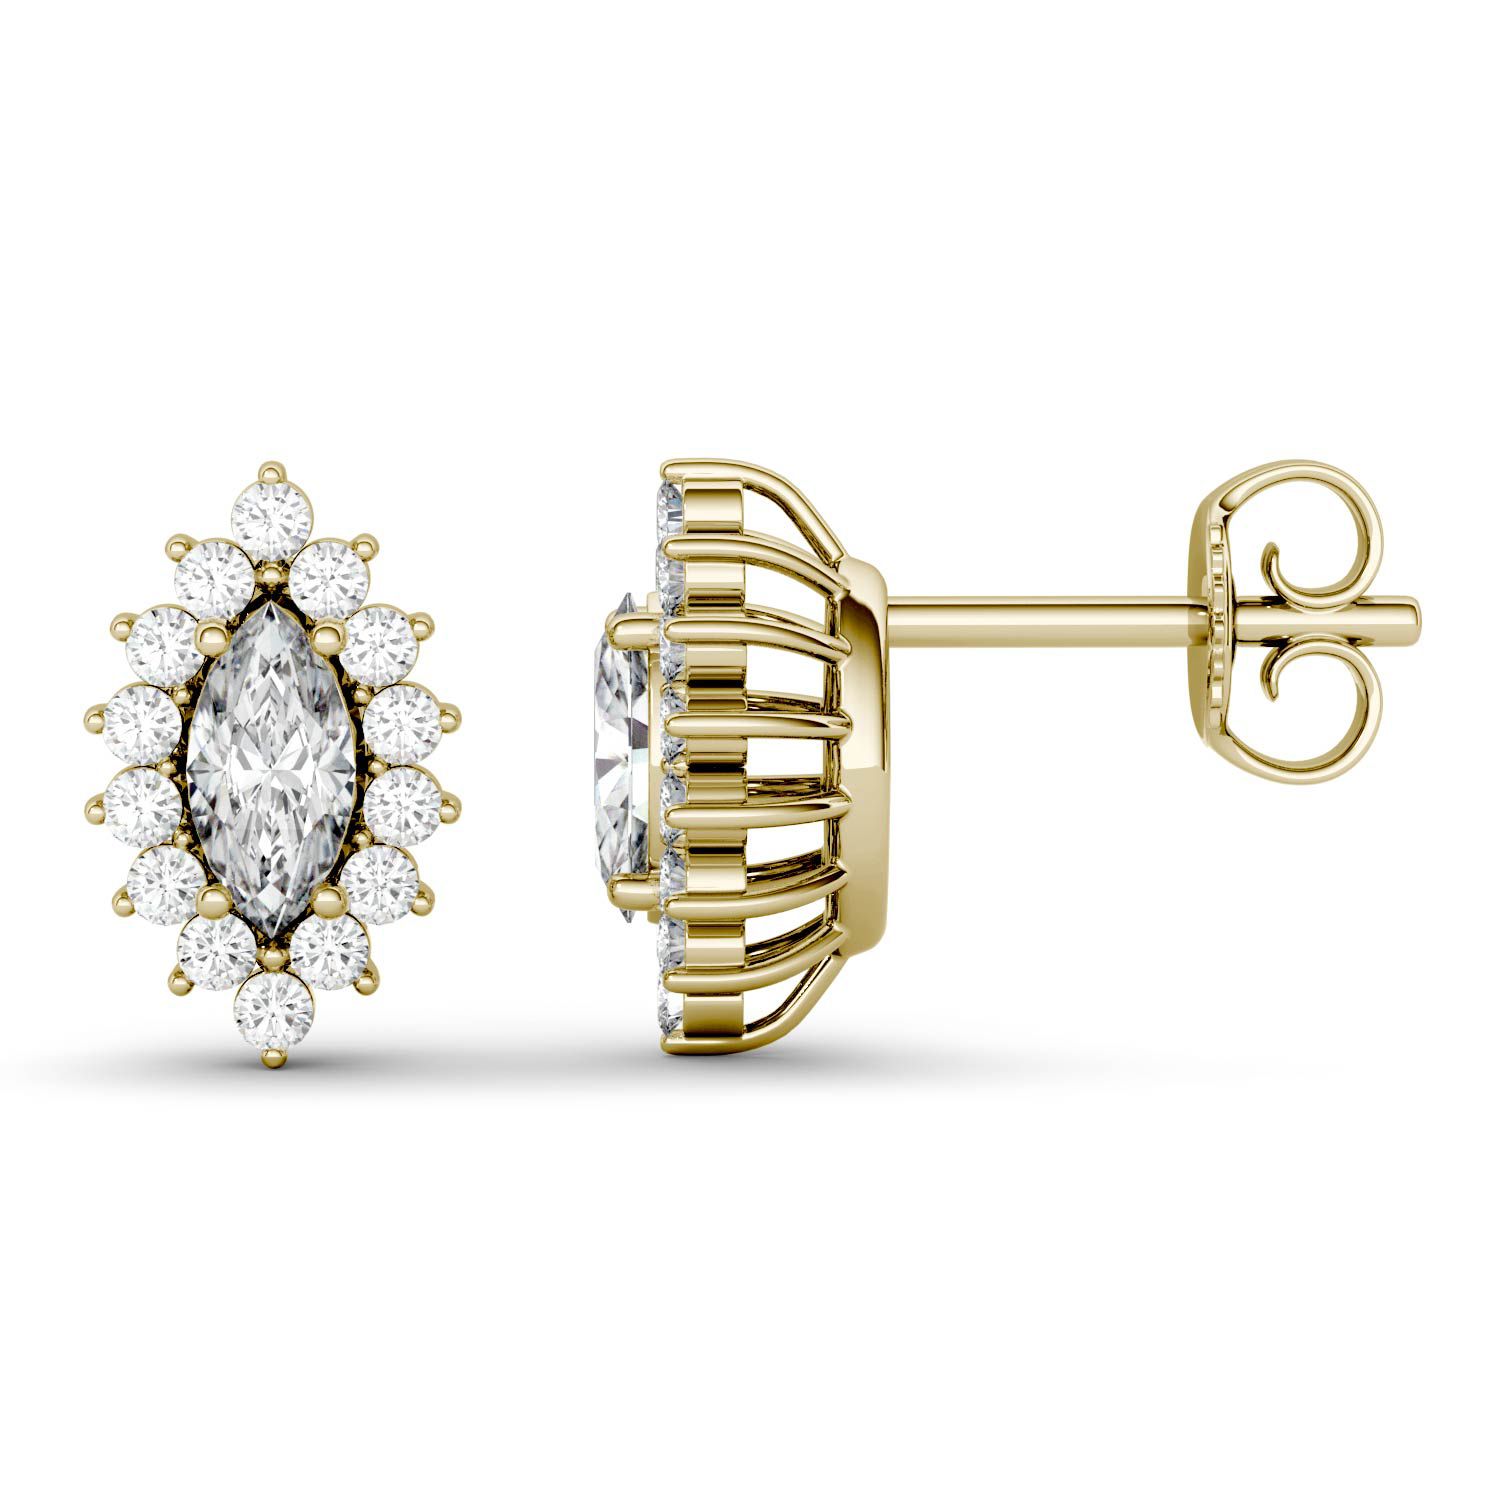 CHARLES & COLVARD: New Shape: Marquise Near-colorless Moissanite Halo Stud Earring